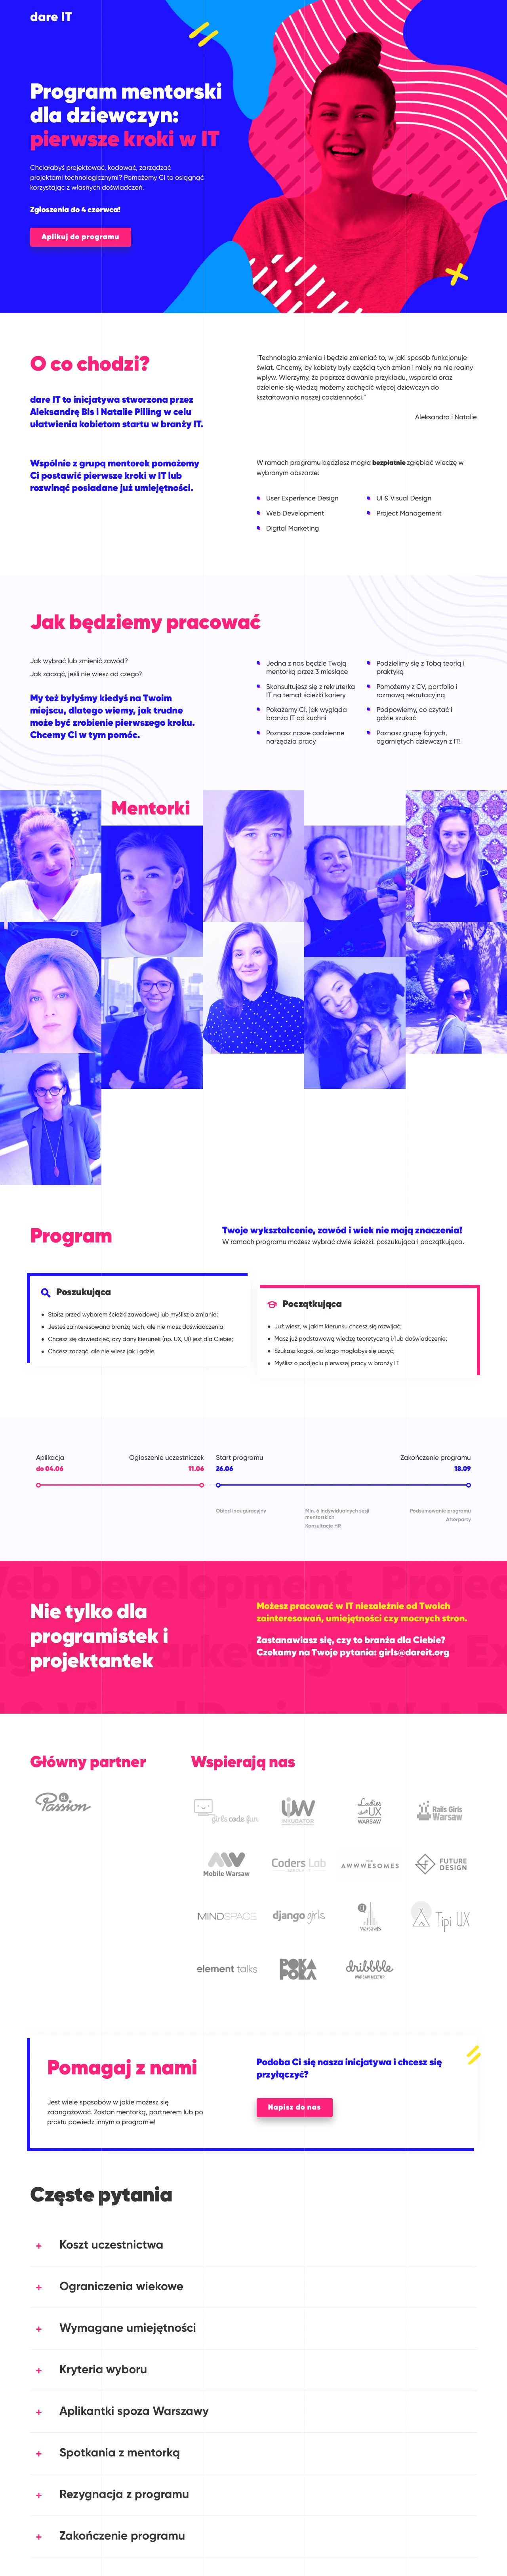 Dare IT Landing Page Example: Would you like to design, code, manage technological projects? We will help you achieve this using your own experience.